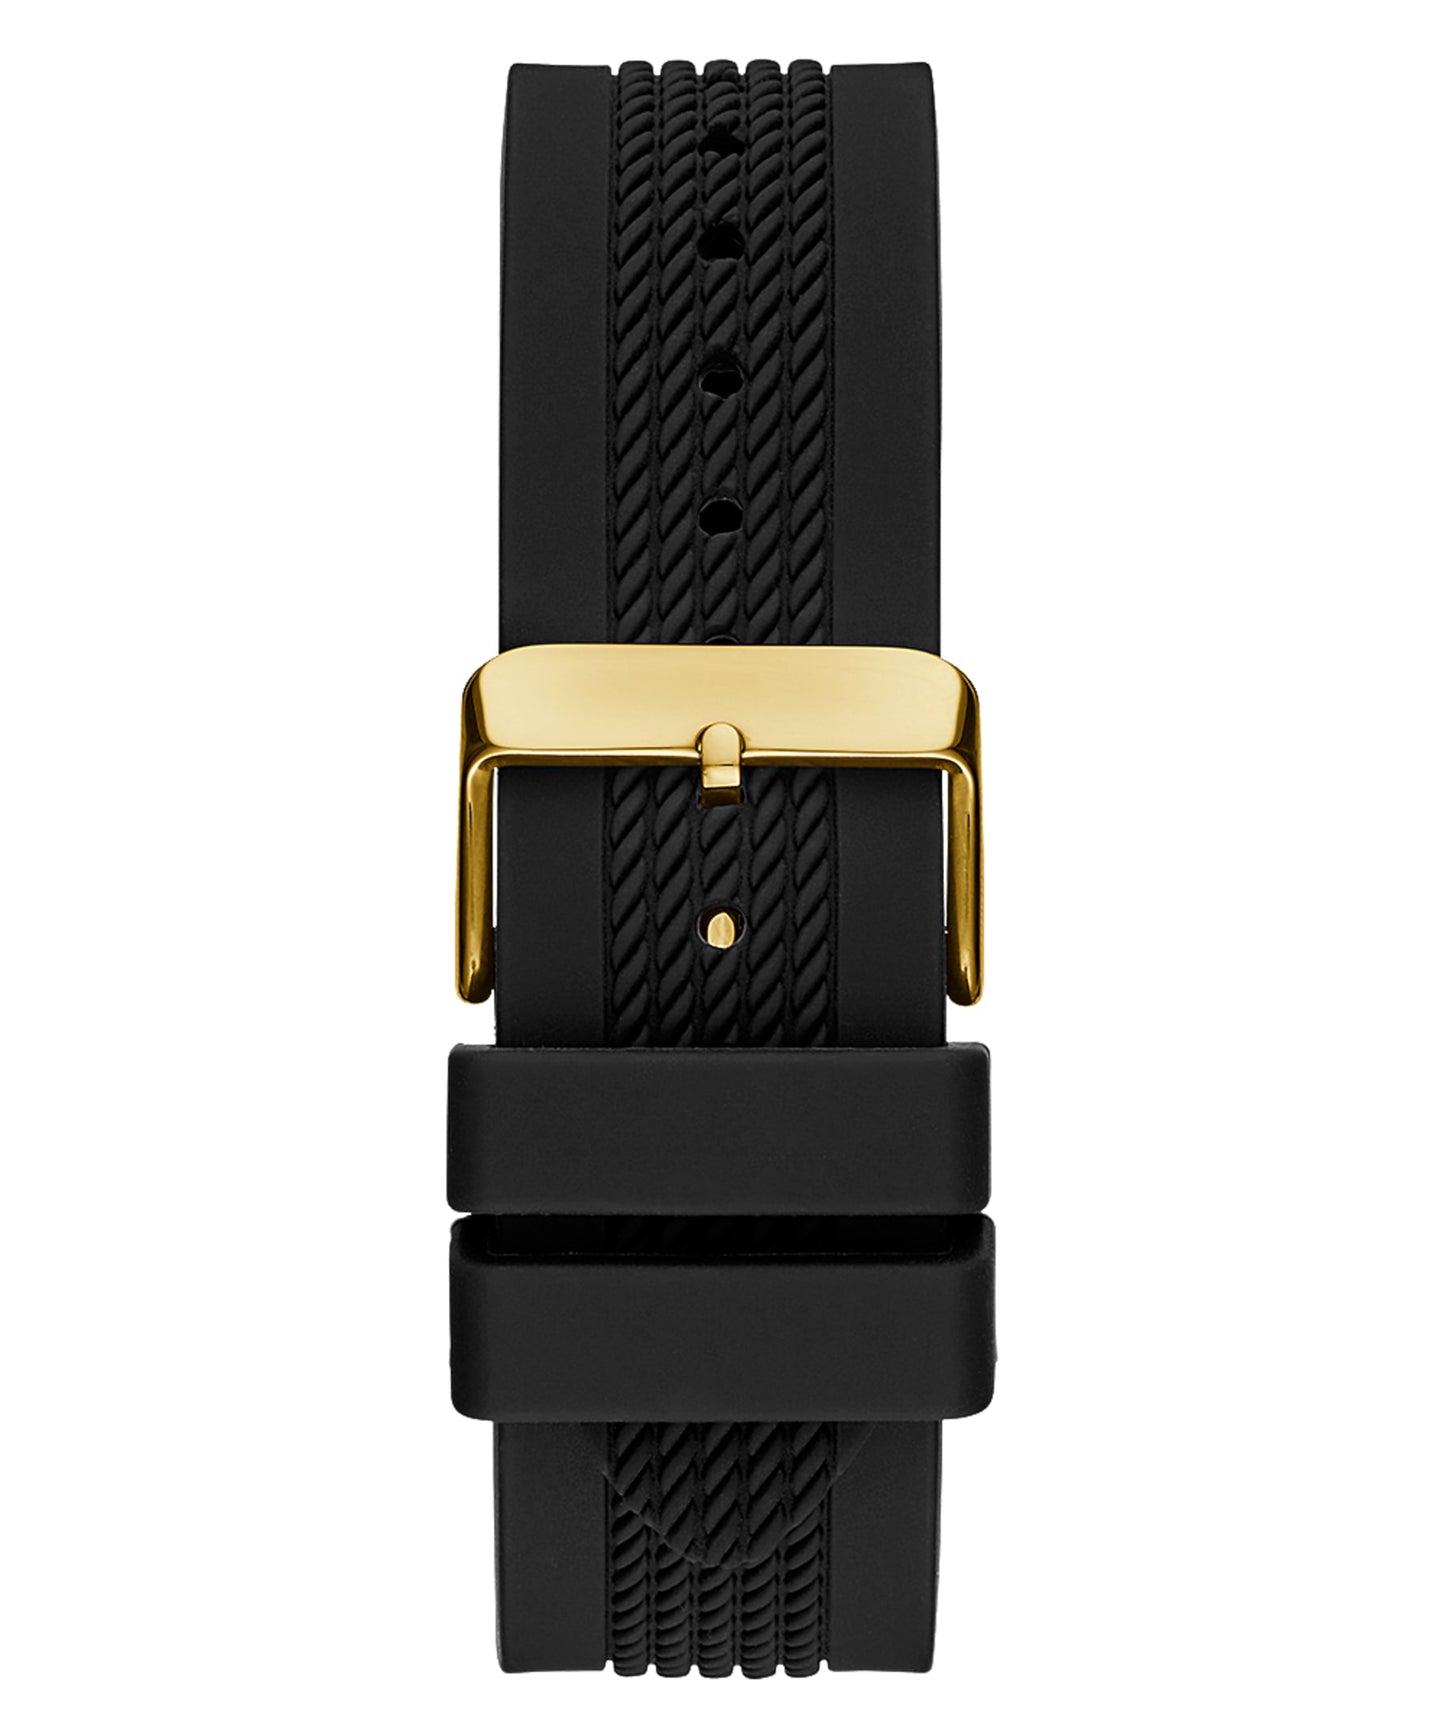 Guess Men's Black And Gold-Tone Multifunction Watch GW0051G2